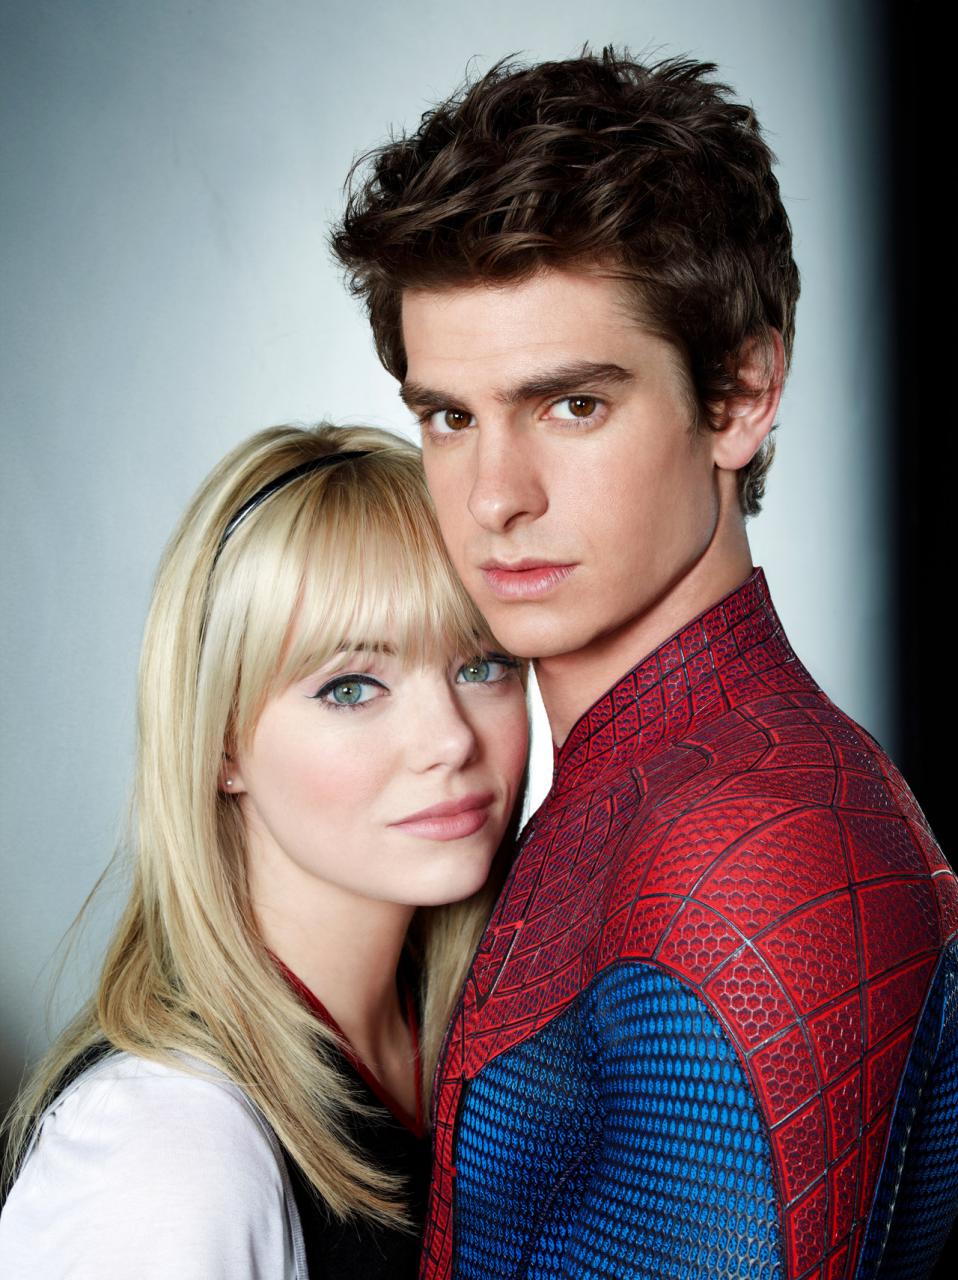 THE AMAZING SPIDER MAN Image Gallery